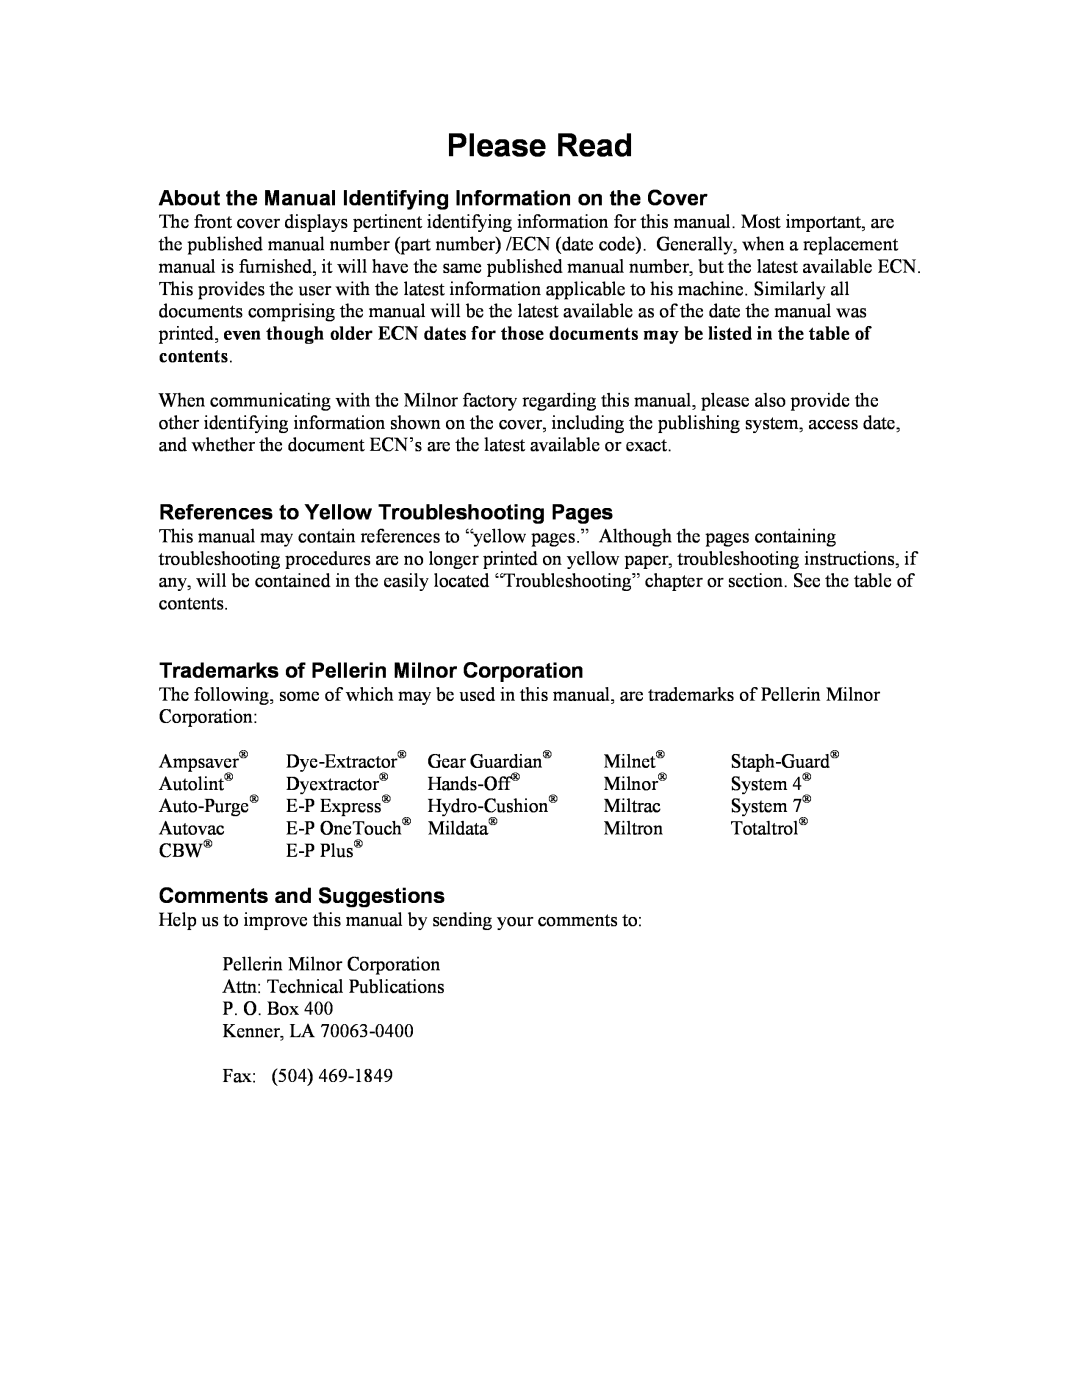 Milnor KWACSD001R manual Please Read, References to Yellow Troubleshooting Pages, Trademarks of Pellerin Milnor Corporation 